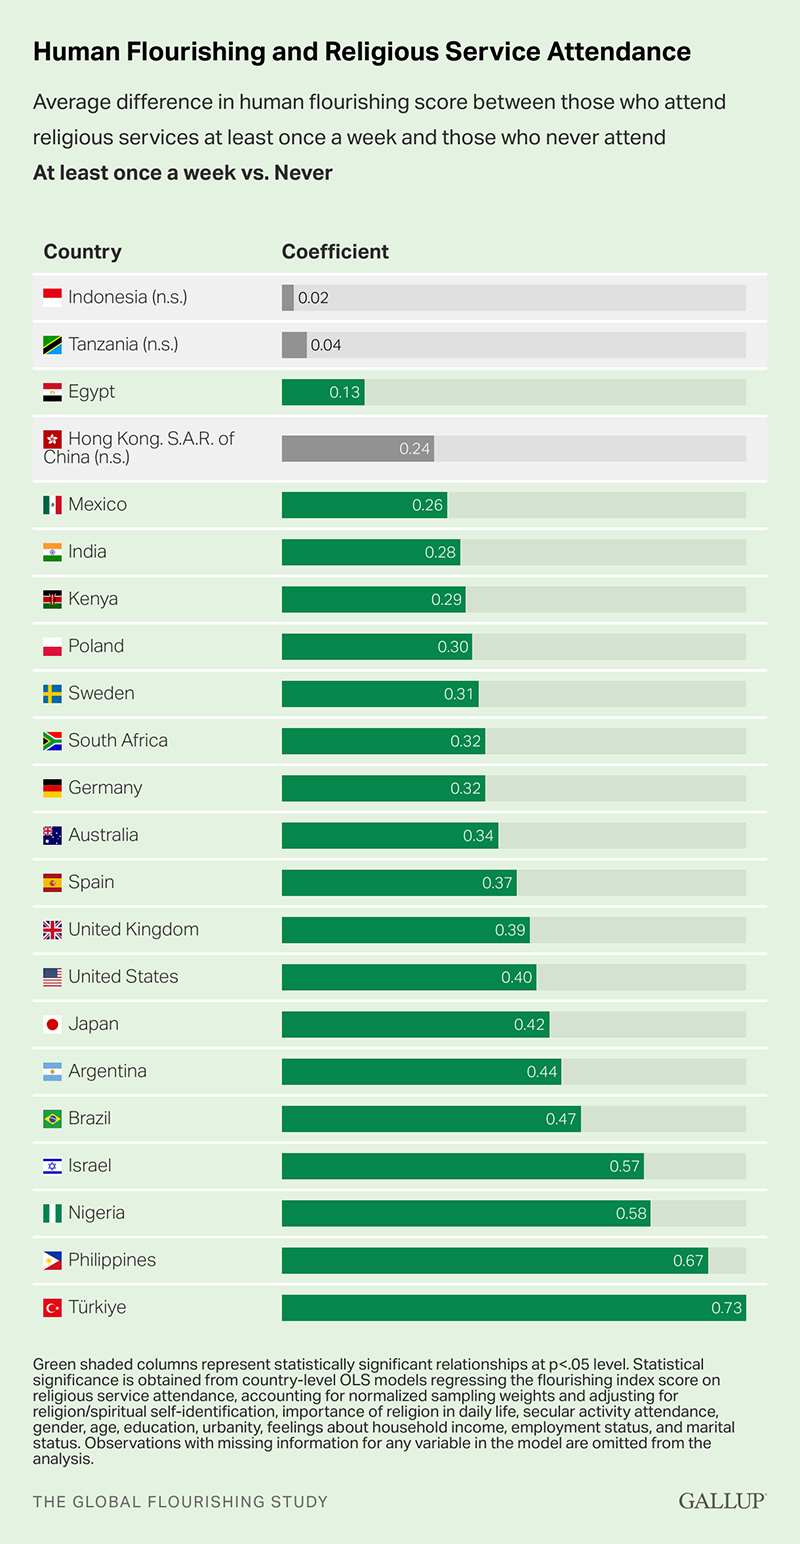 "Human Flourishing and Religious Service Attendance" (Graphic courtesy Gallup)